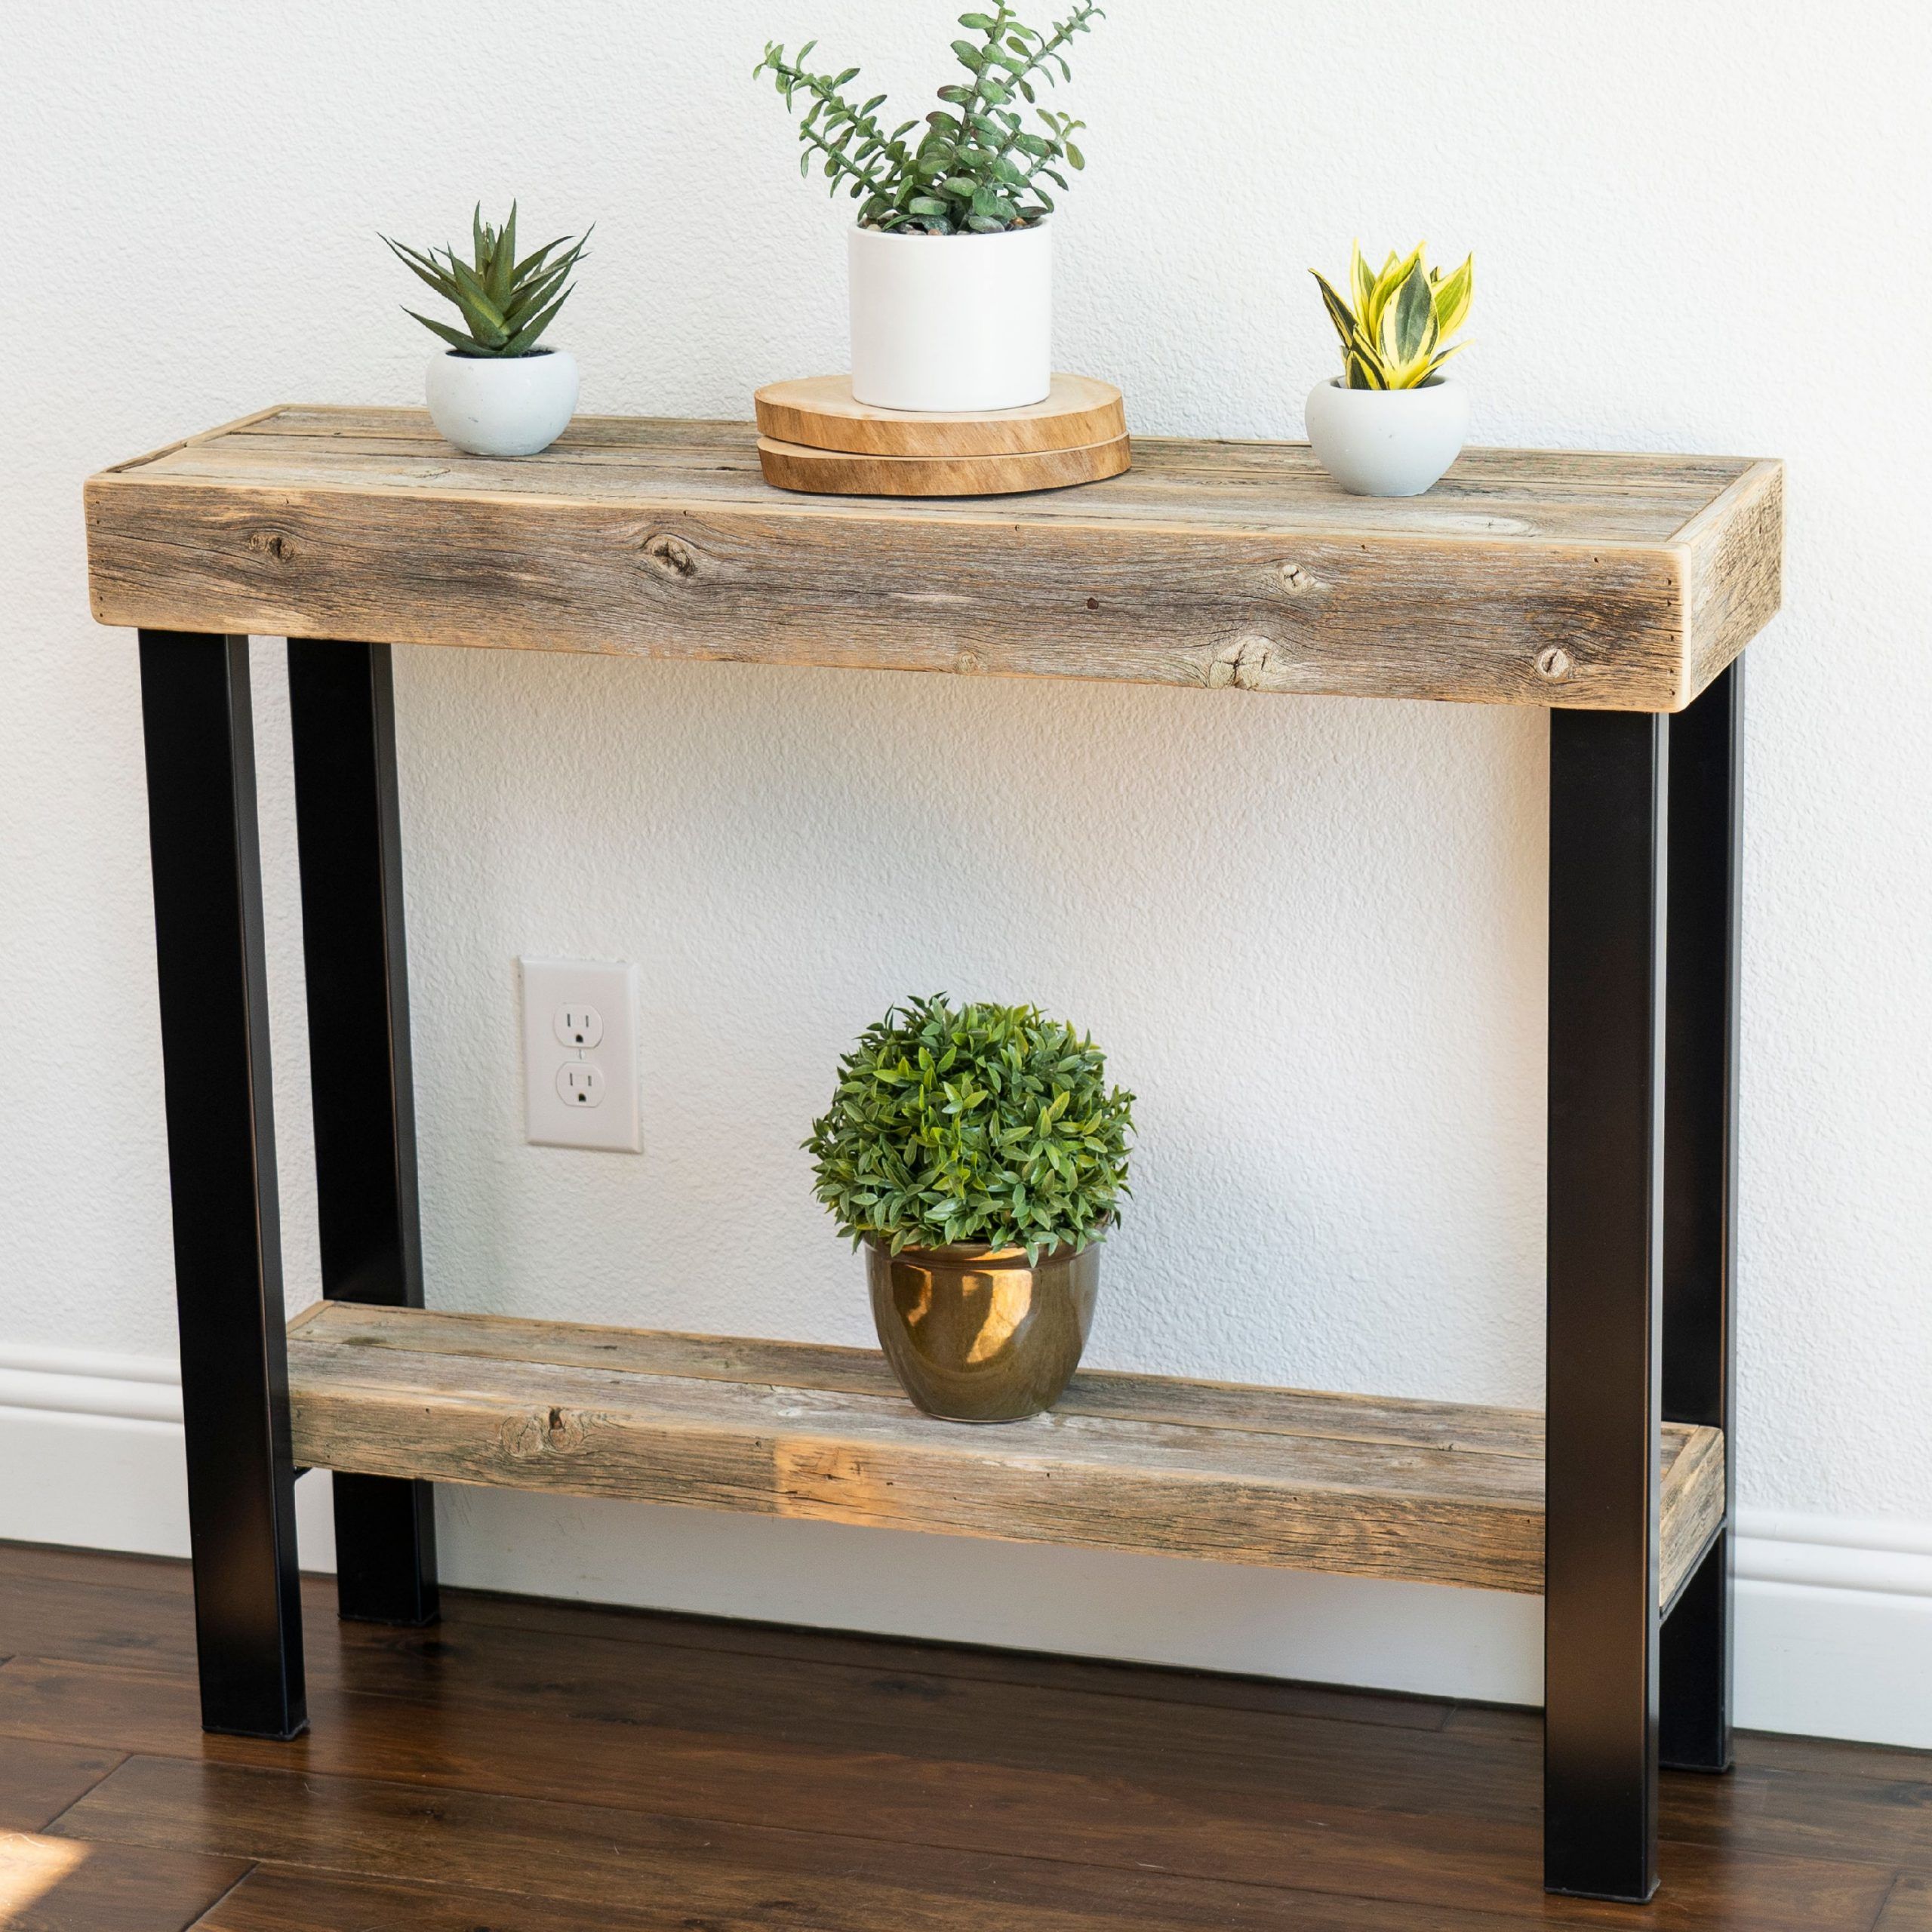 Roland Small Living Room Console Table, Reclaimed Wood W/ Black Within Gray Wood Black Steel Console Tables (View 2 of 20)